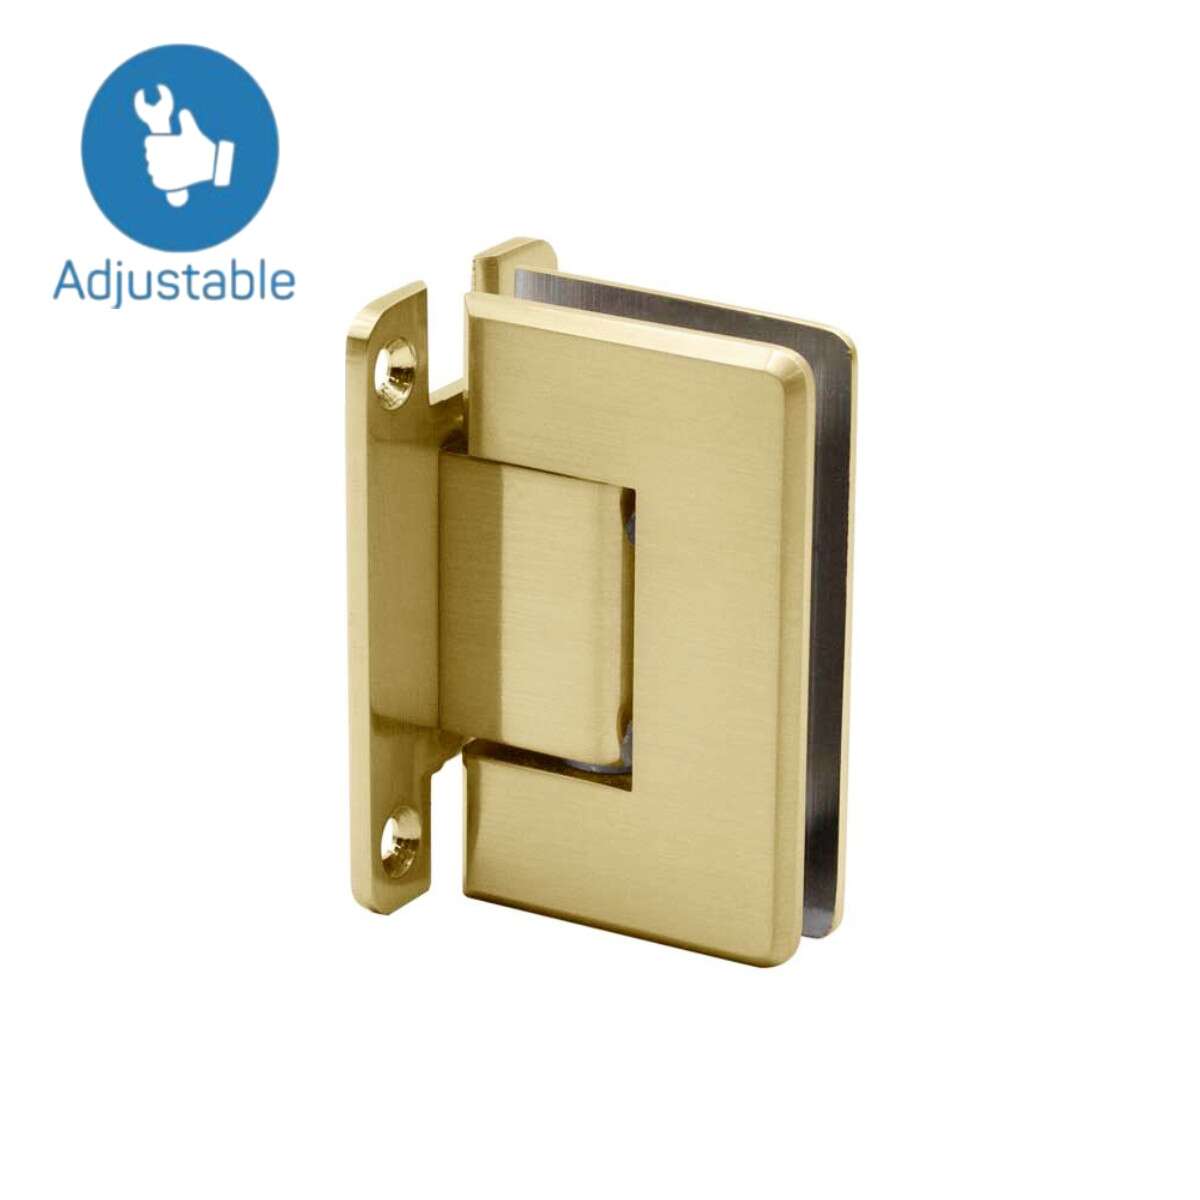 Wall to Glass "H" Back Plate Adjustable Hinge- Beveled